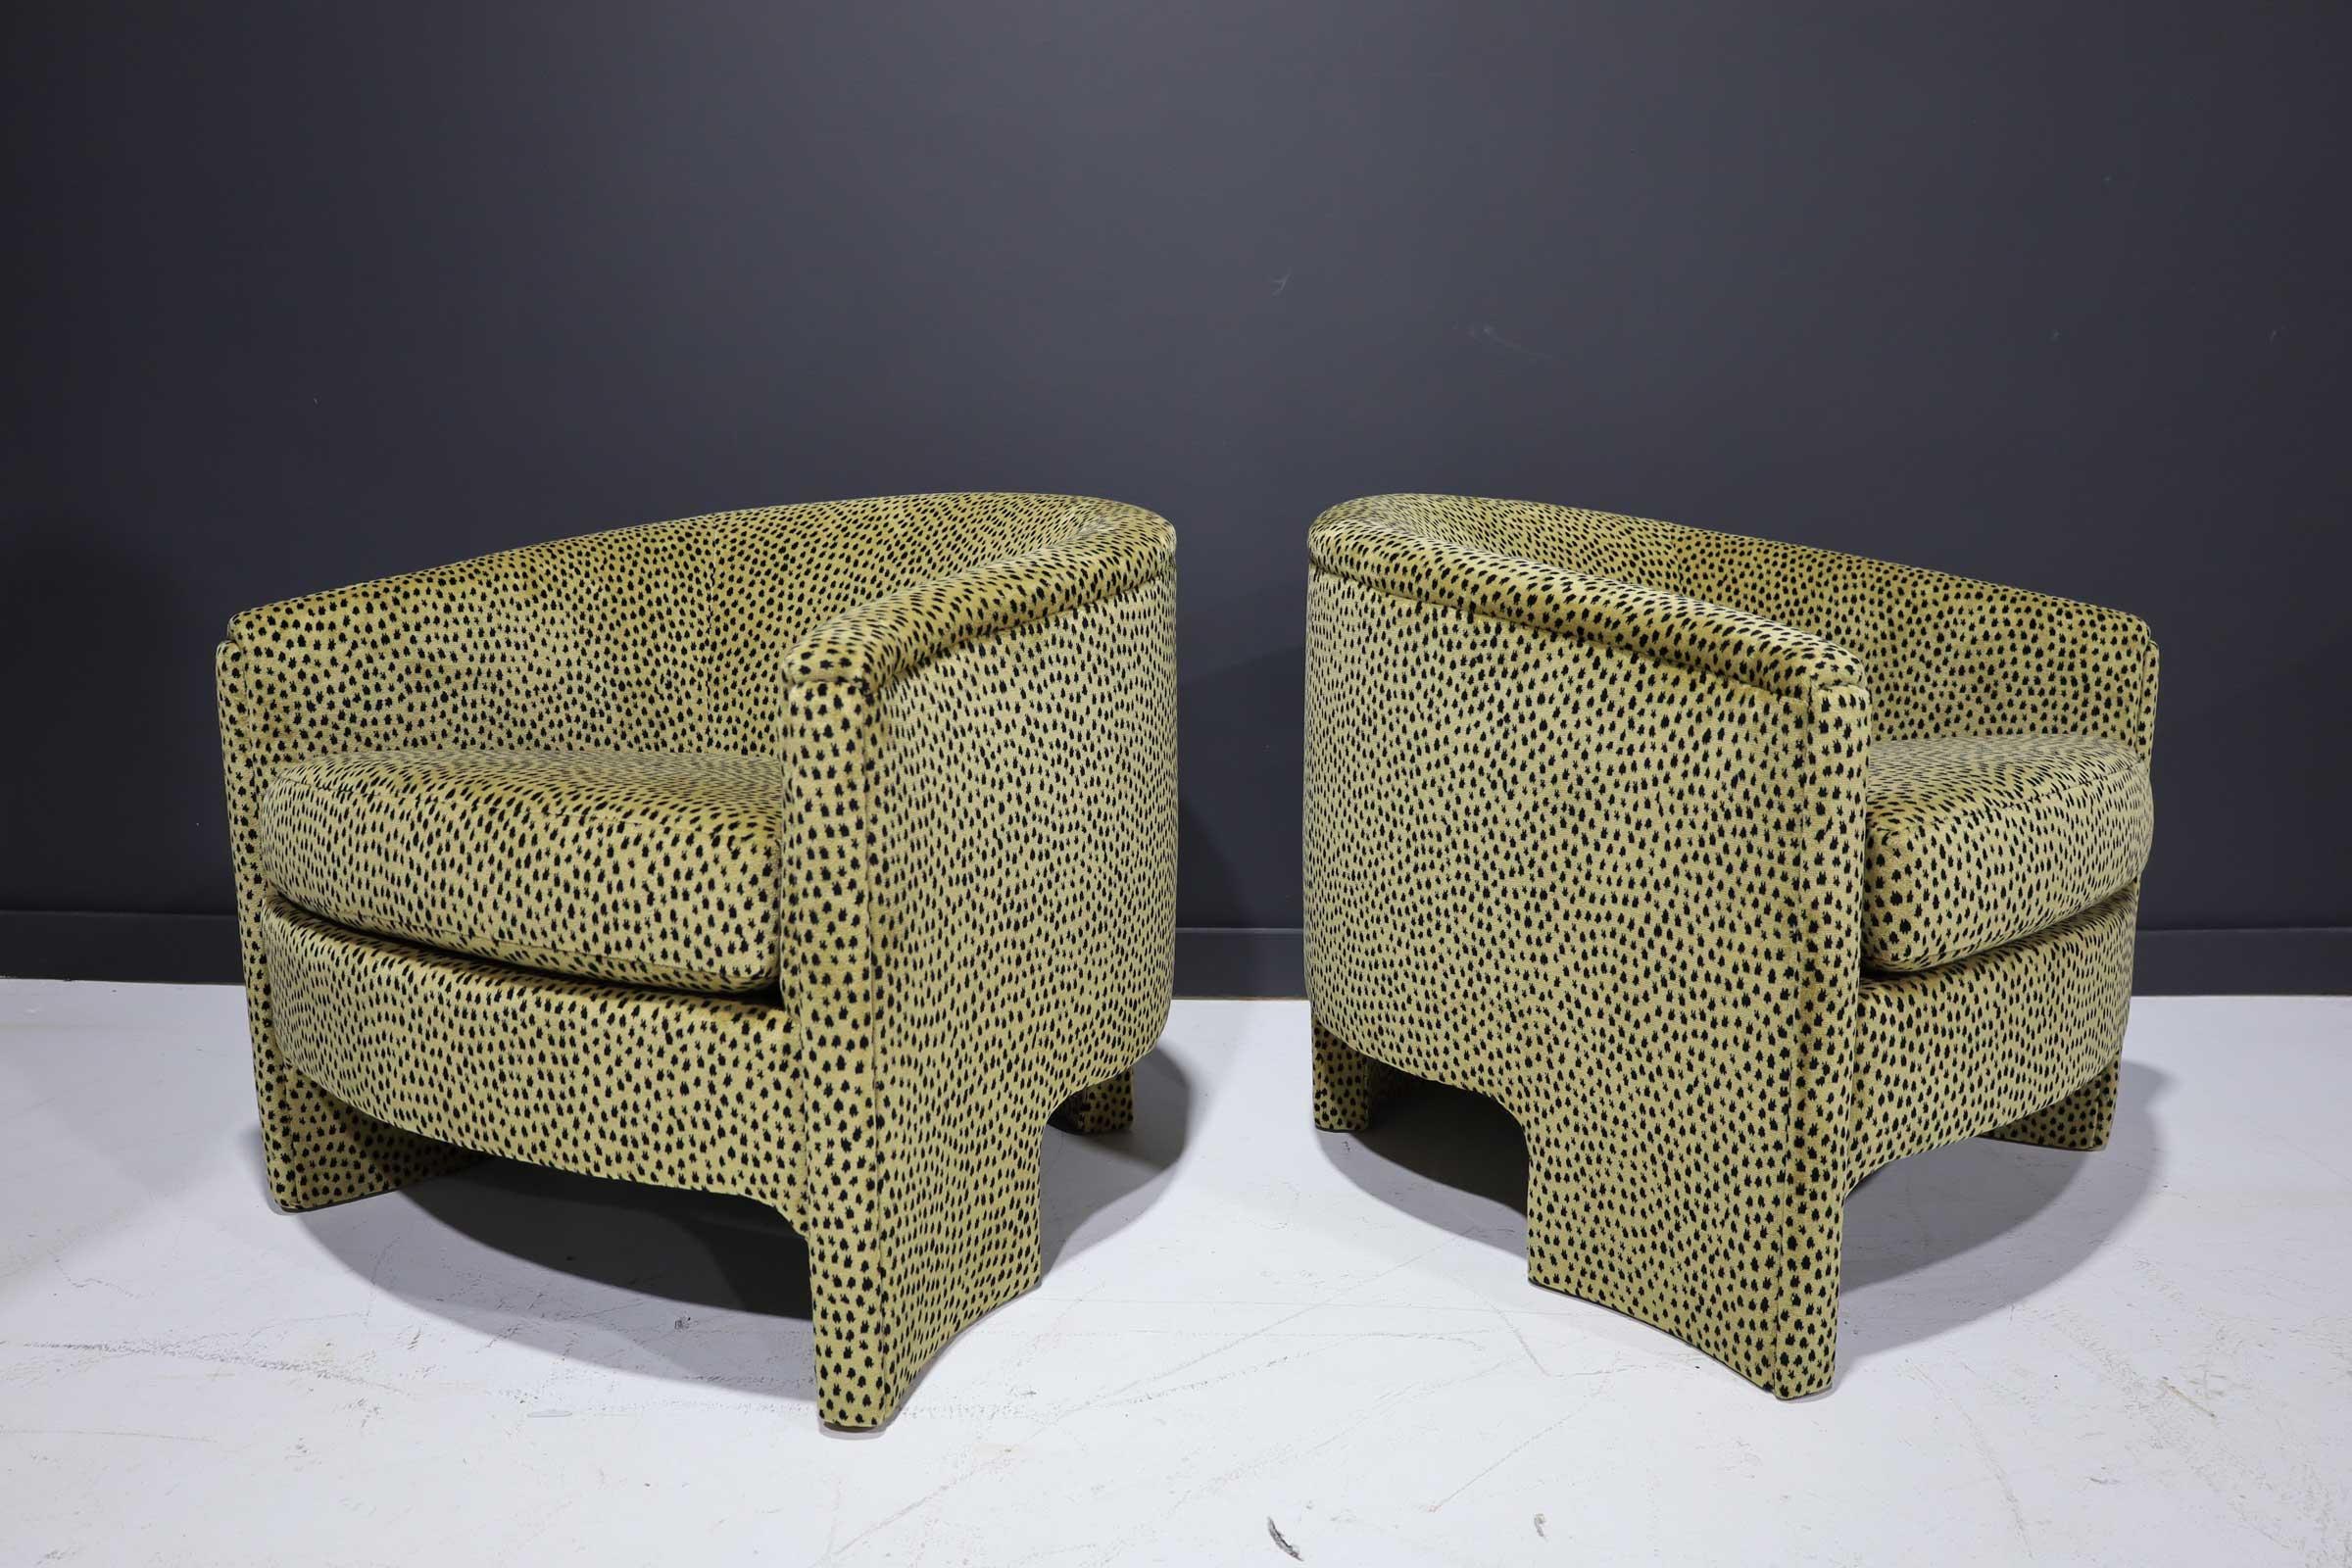 Pair of Mid Century Modern Tub Chairs in Cheetah Print Velvet In Excellent Condition For Sale In Dallas, TX